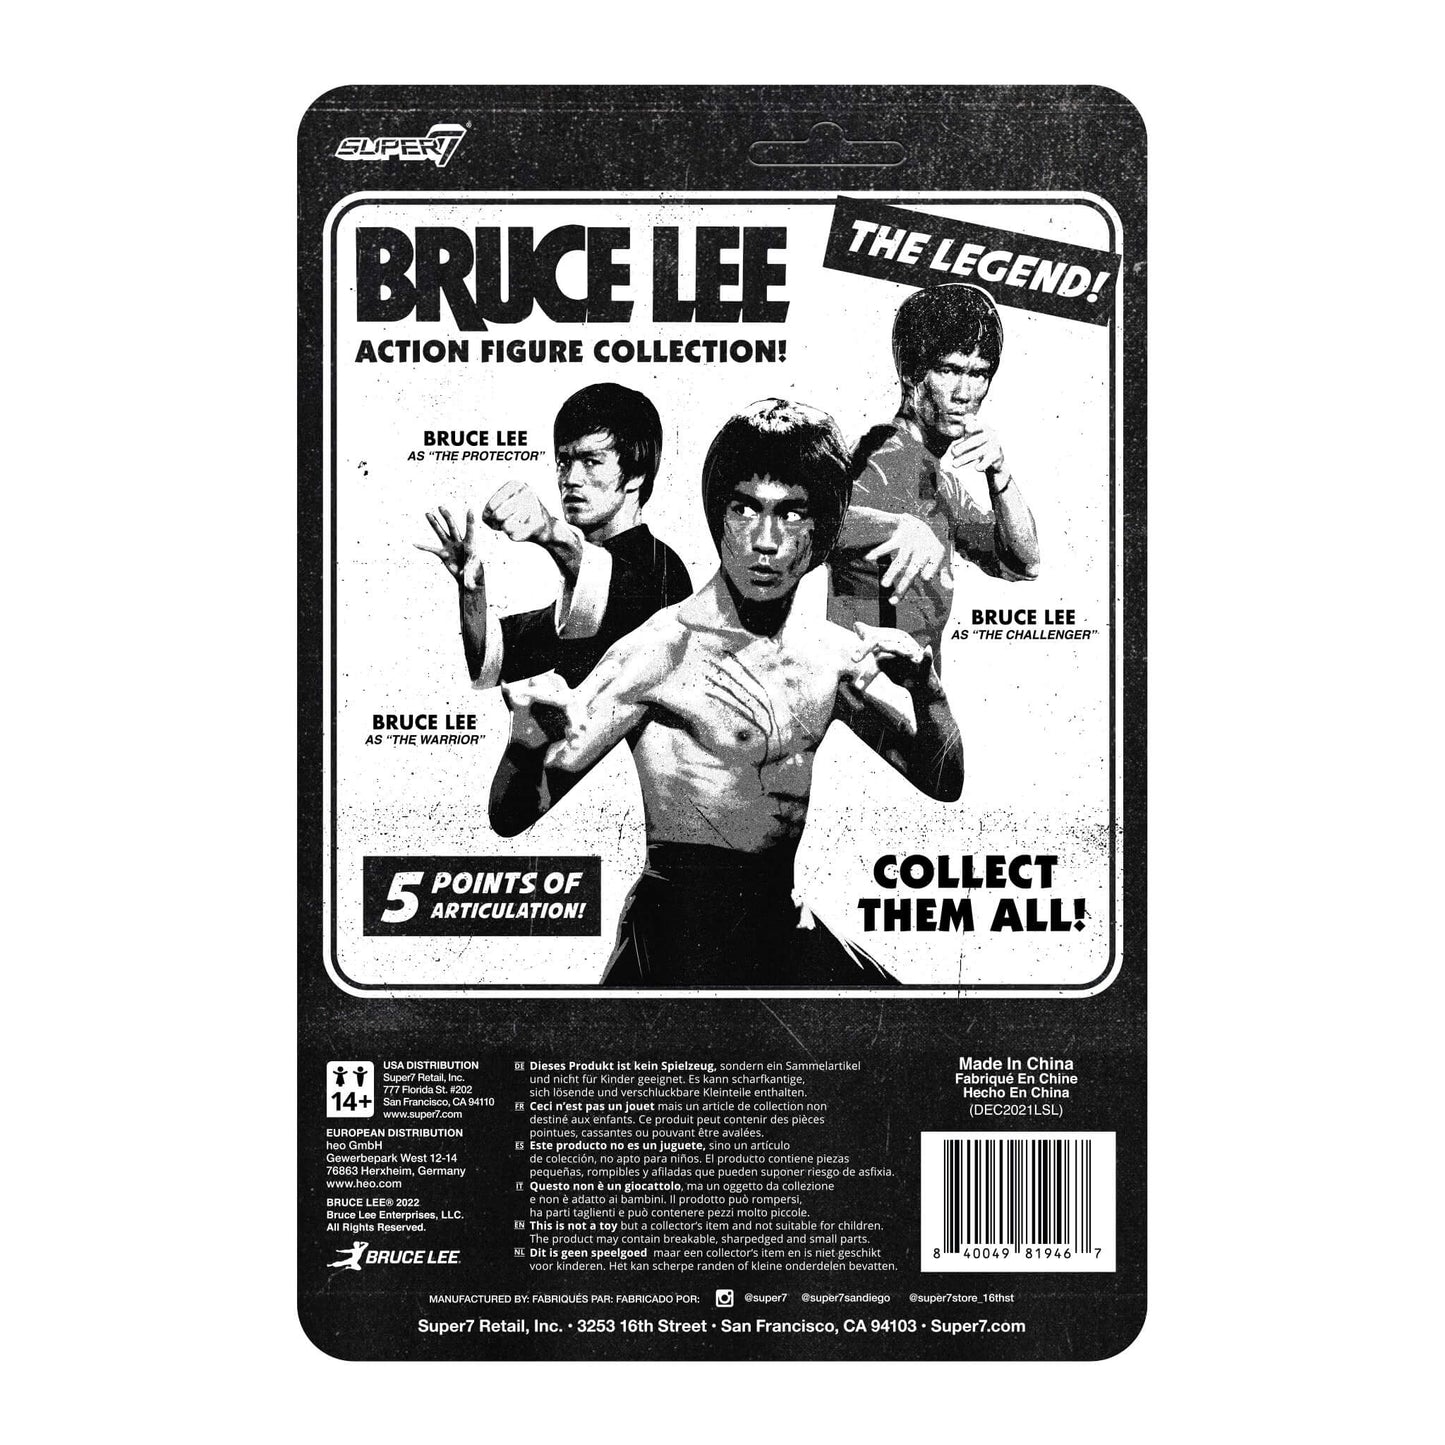 Bruce Lee (The Warrior)